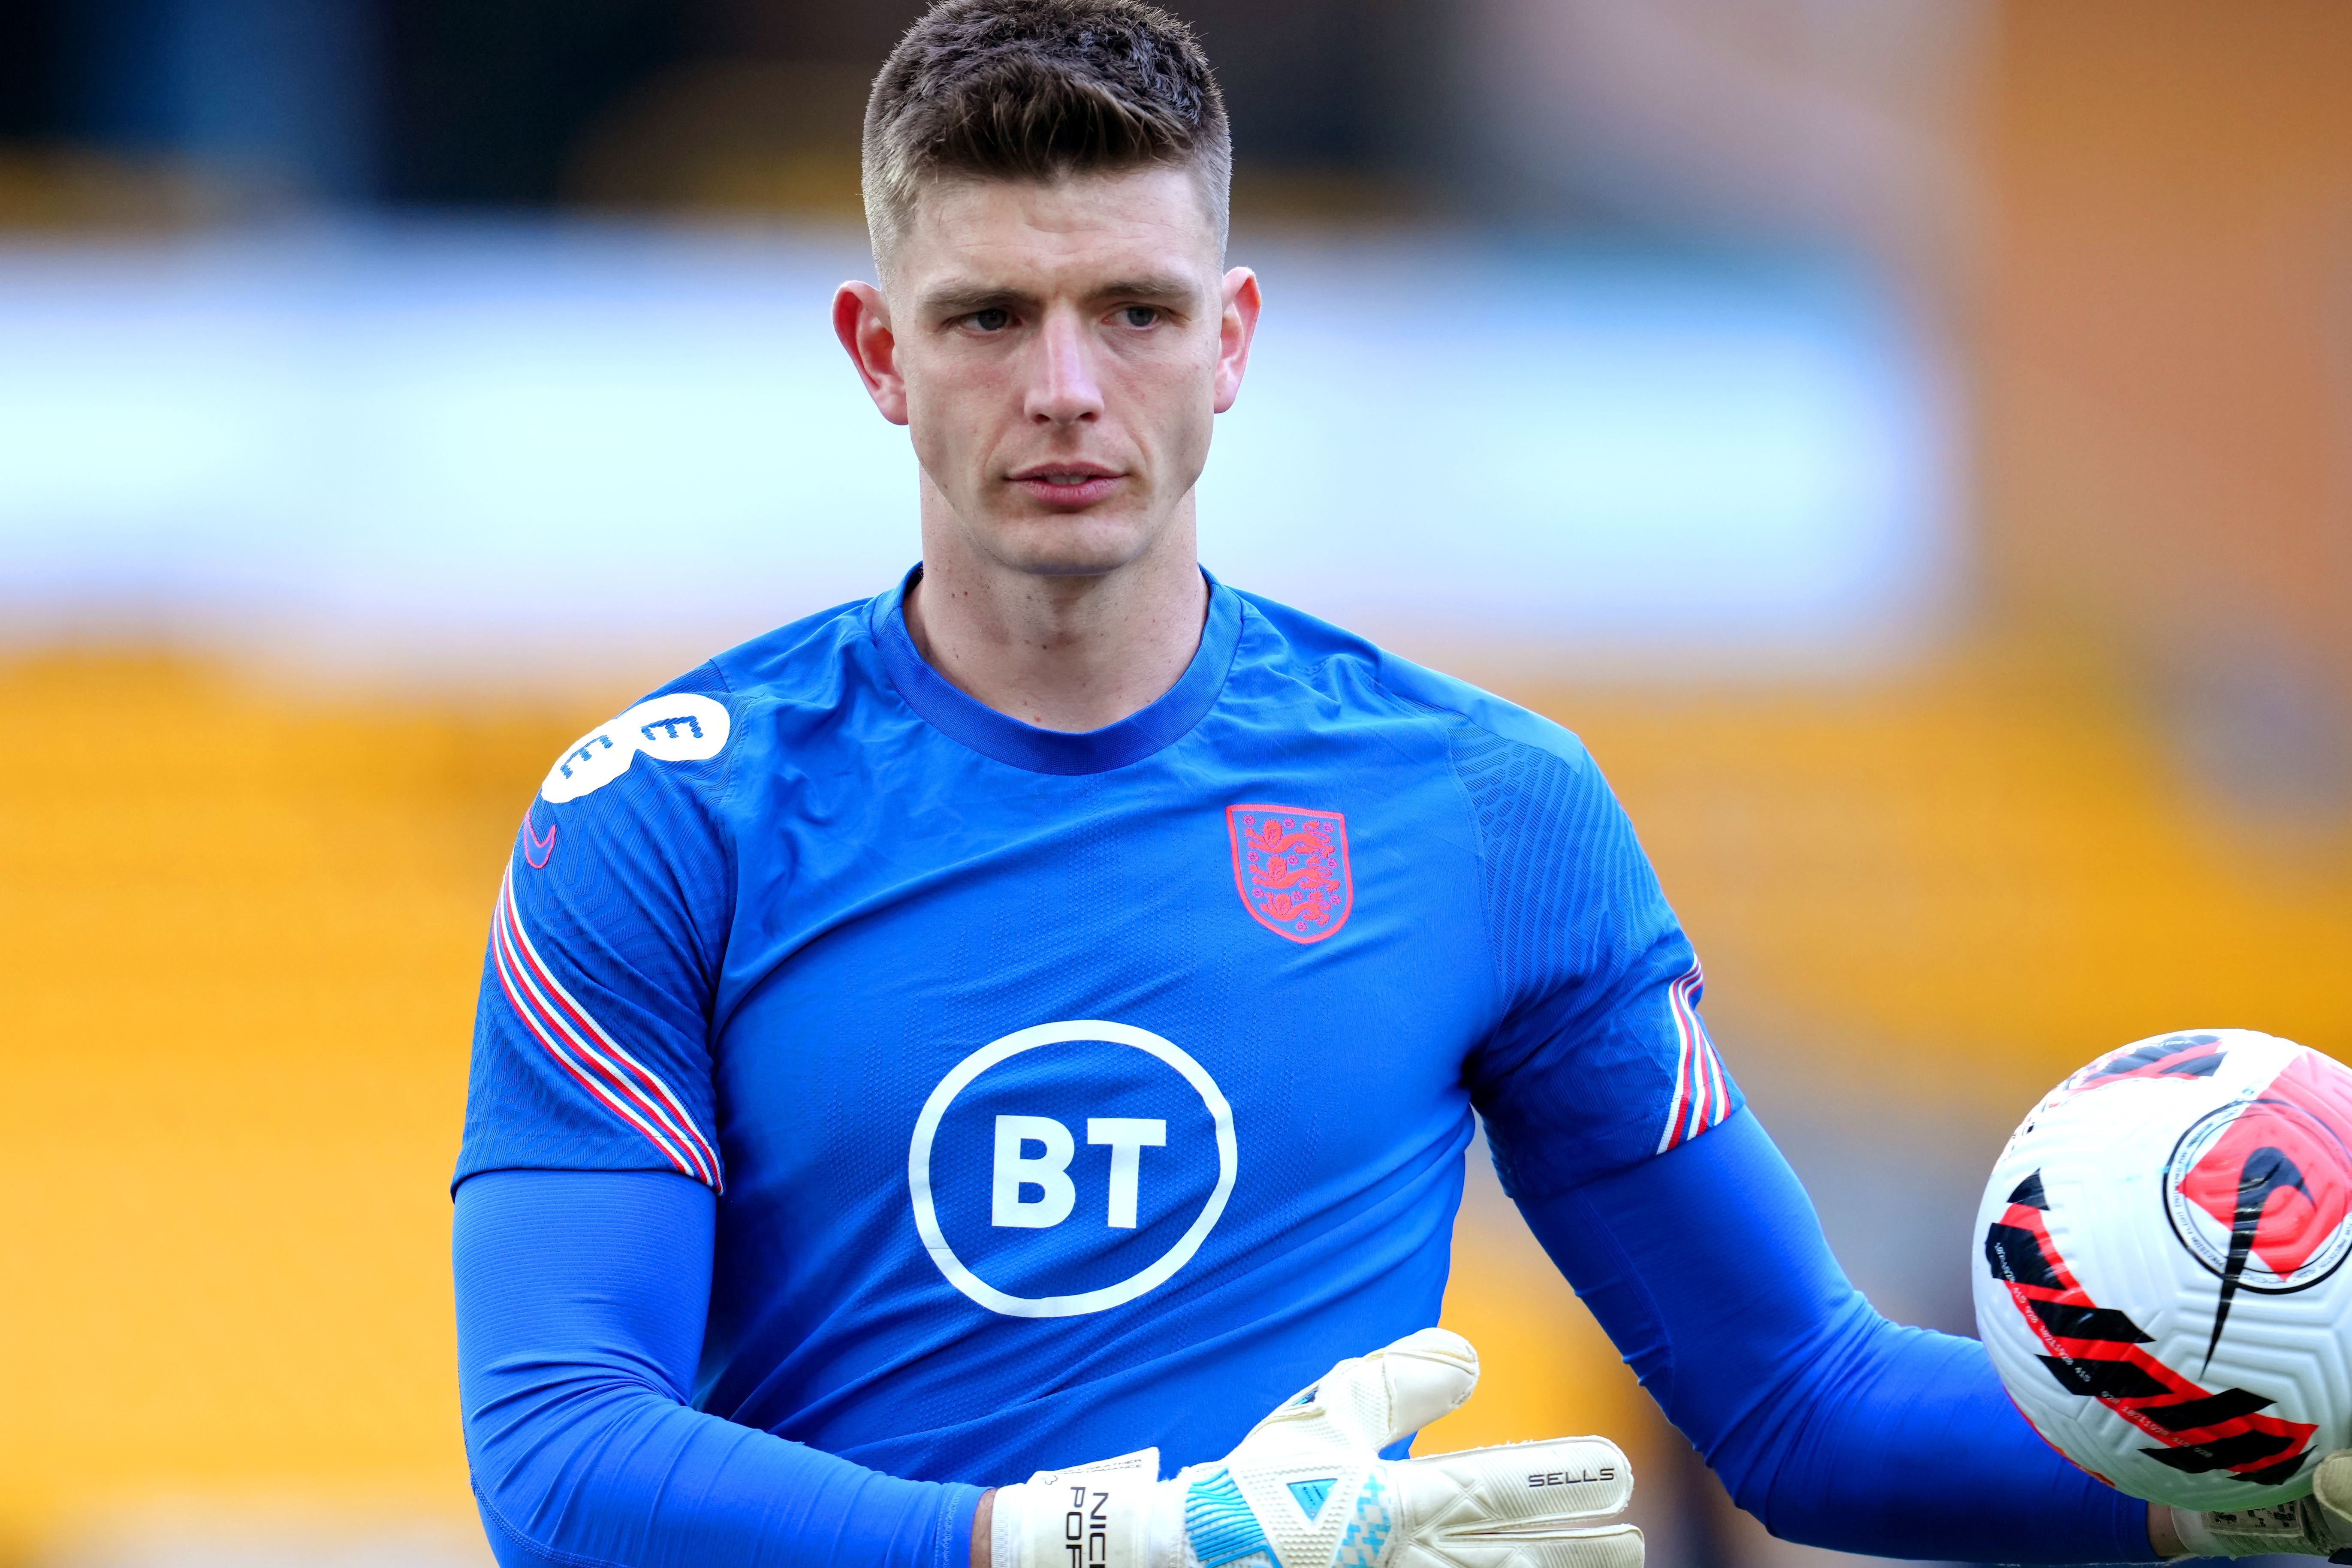 Nick Pope has shone between the posts for Newcastle this season